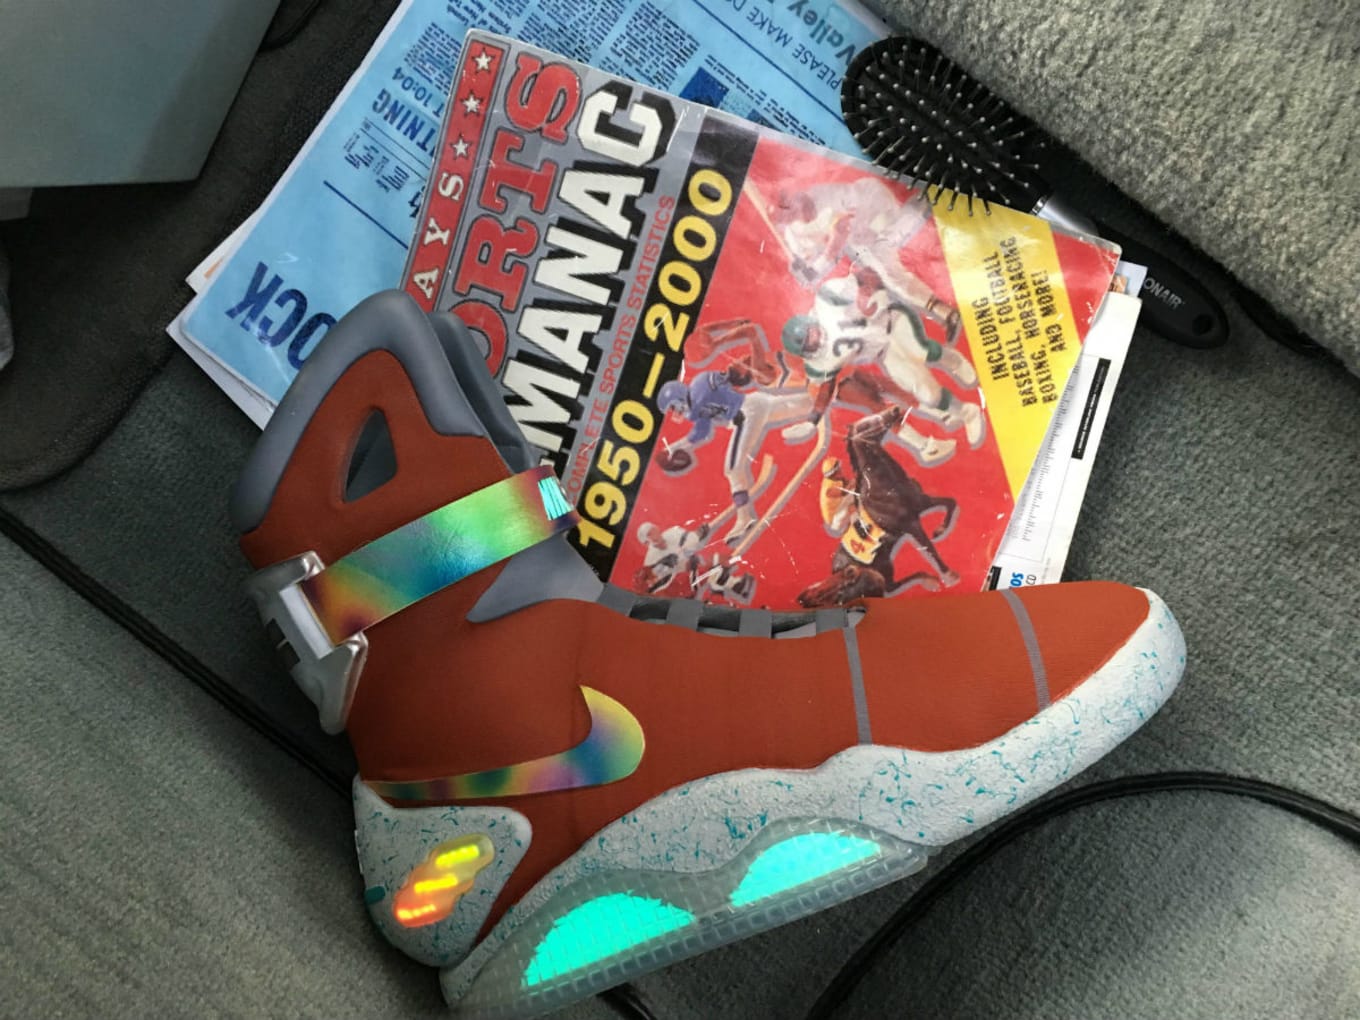 red nike air mags